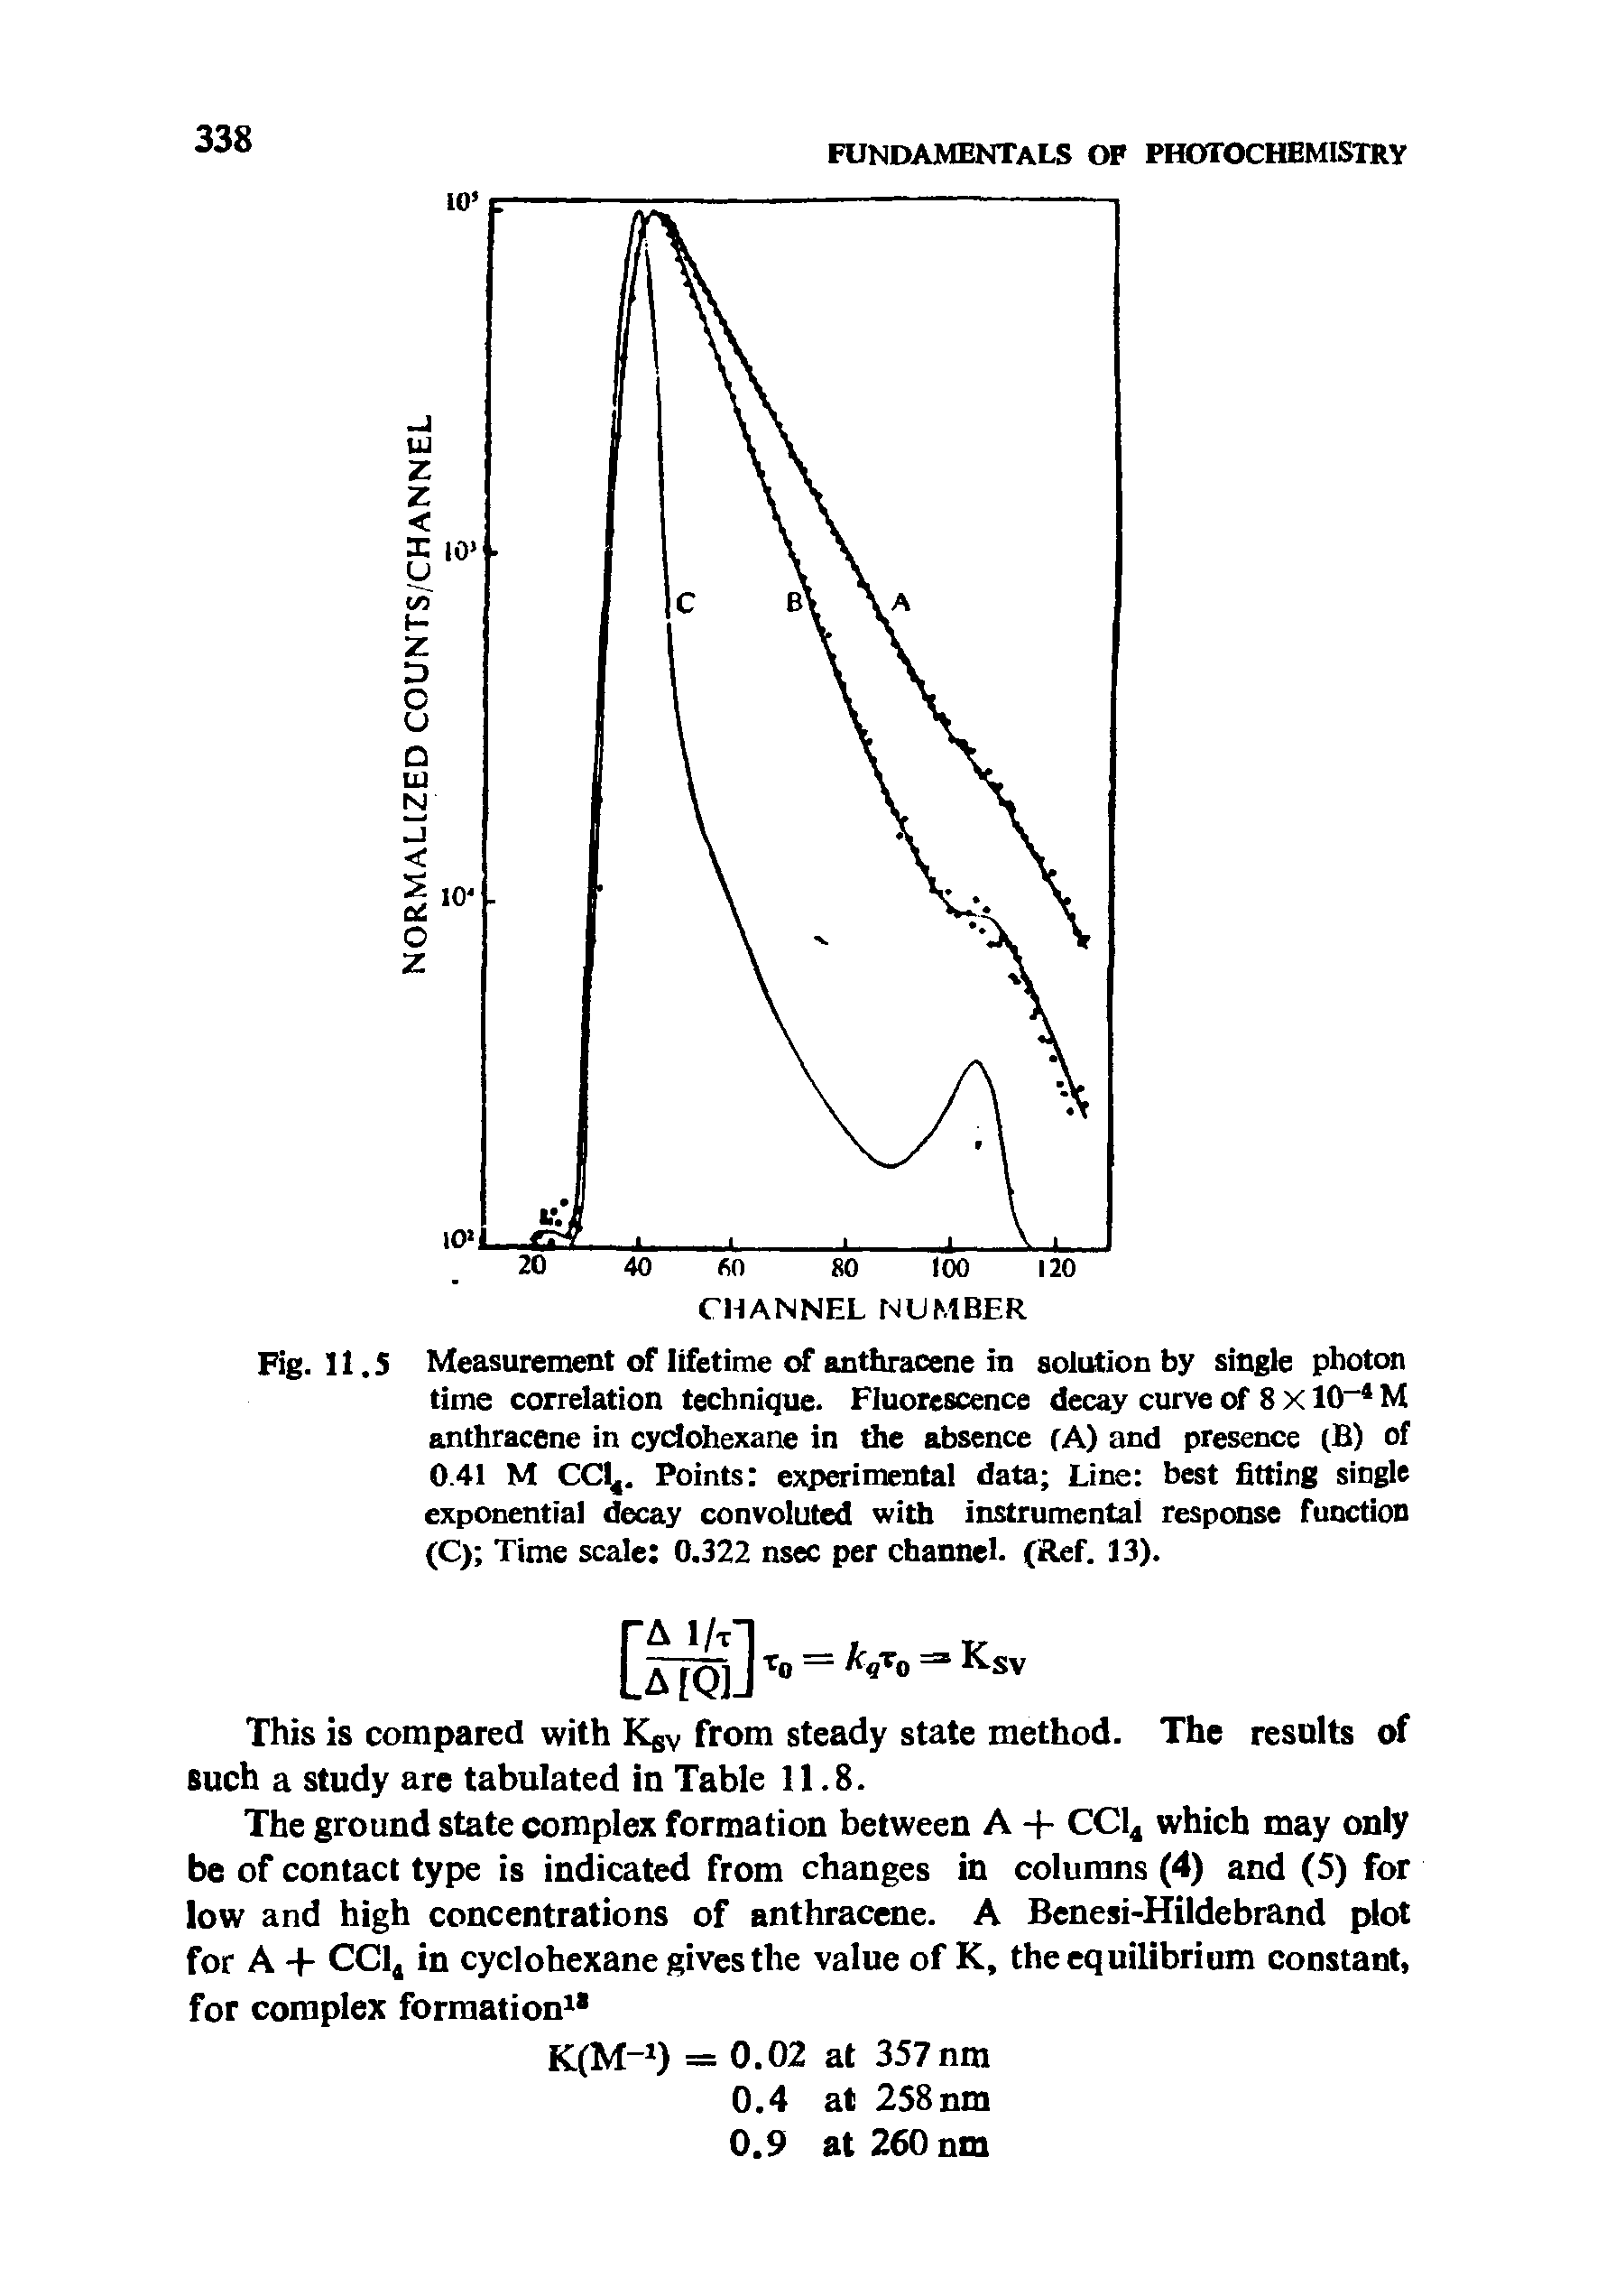 Fig. 11.5 Measurement of lifetime of anthracene in solution by single photon time correlation technique. Fluorescence decay curve of 8 X10-4 M anthracene in cyclohexane in the absence (A) and presence (B) of 0.41 M CC14. Points experimental data Line best fitting single exponential decay convoluted with instrumental response function (C) Time scale 0.322 nsec per channel. (Ref. 13).